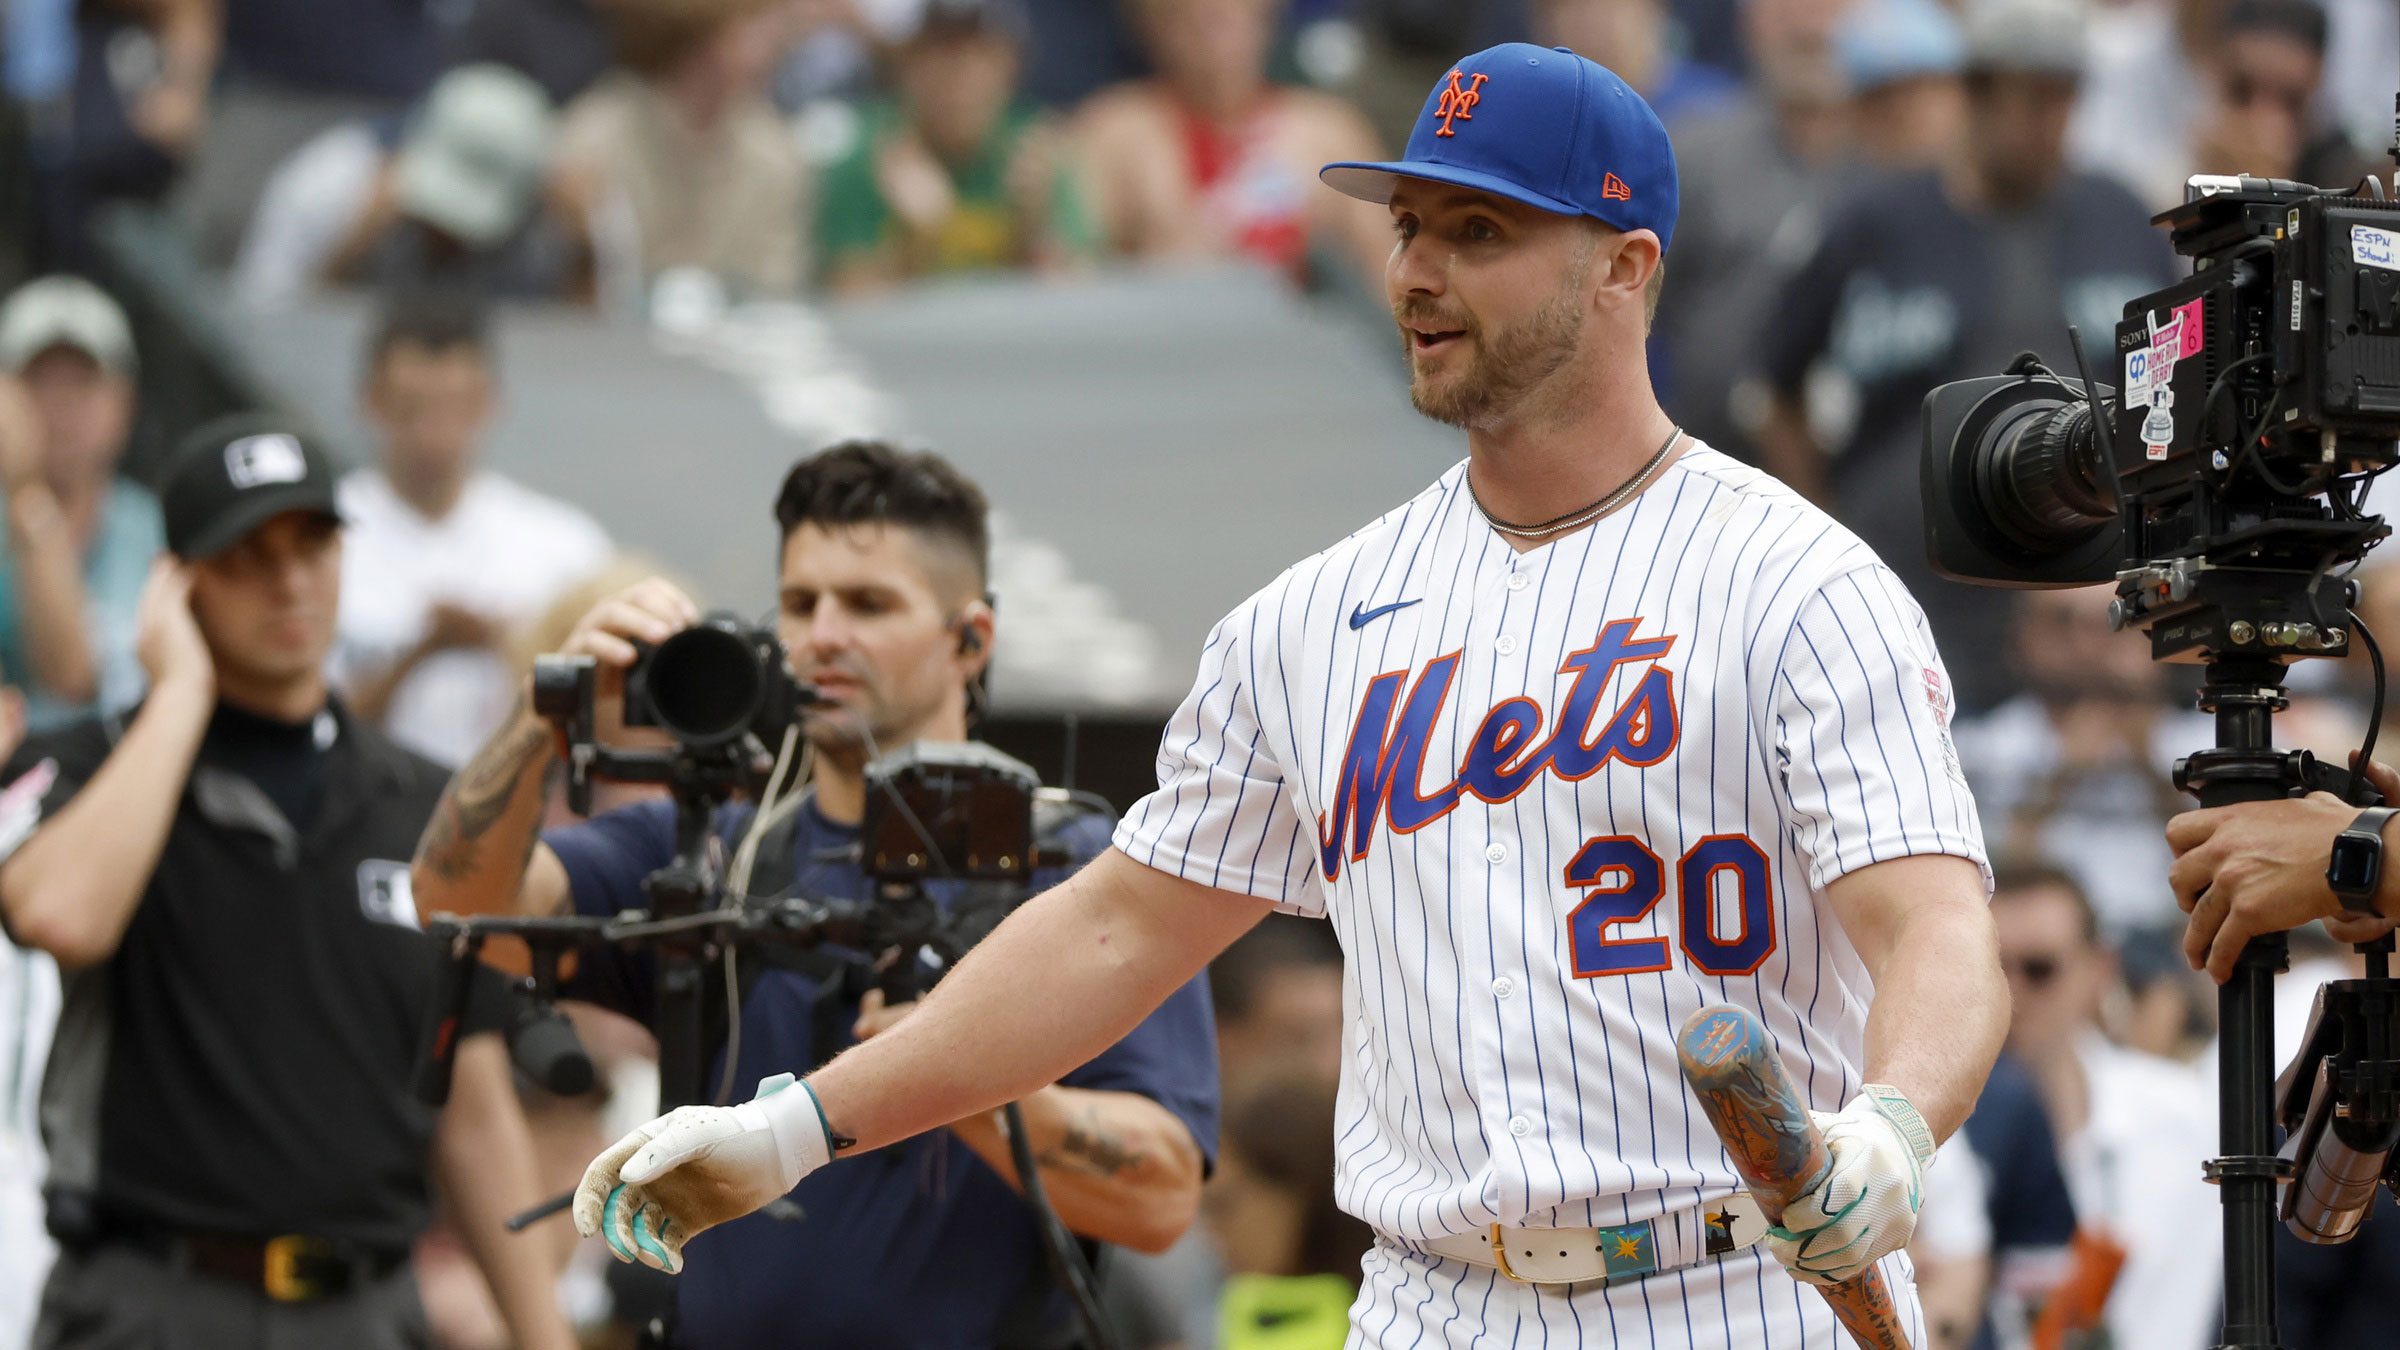 Pete Alonso makes big Home Run Derby decision